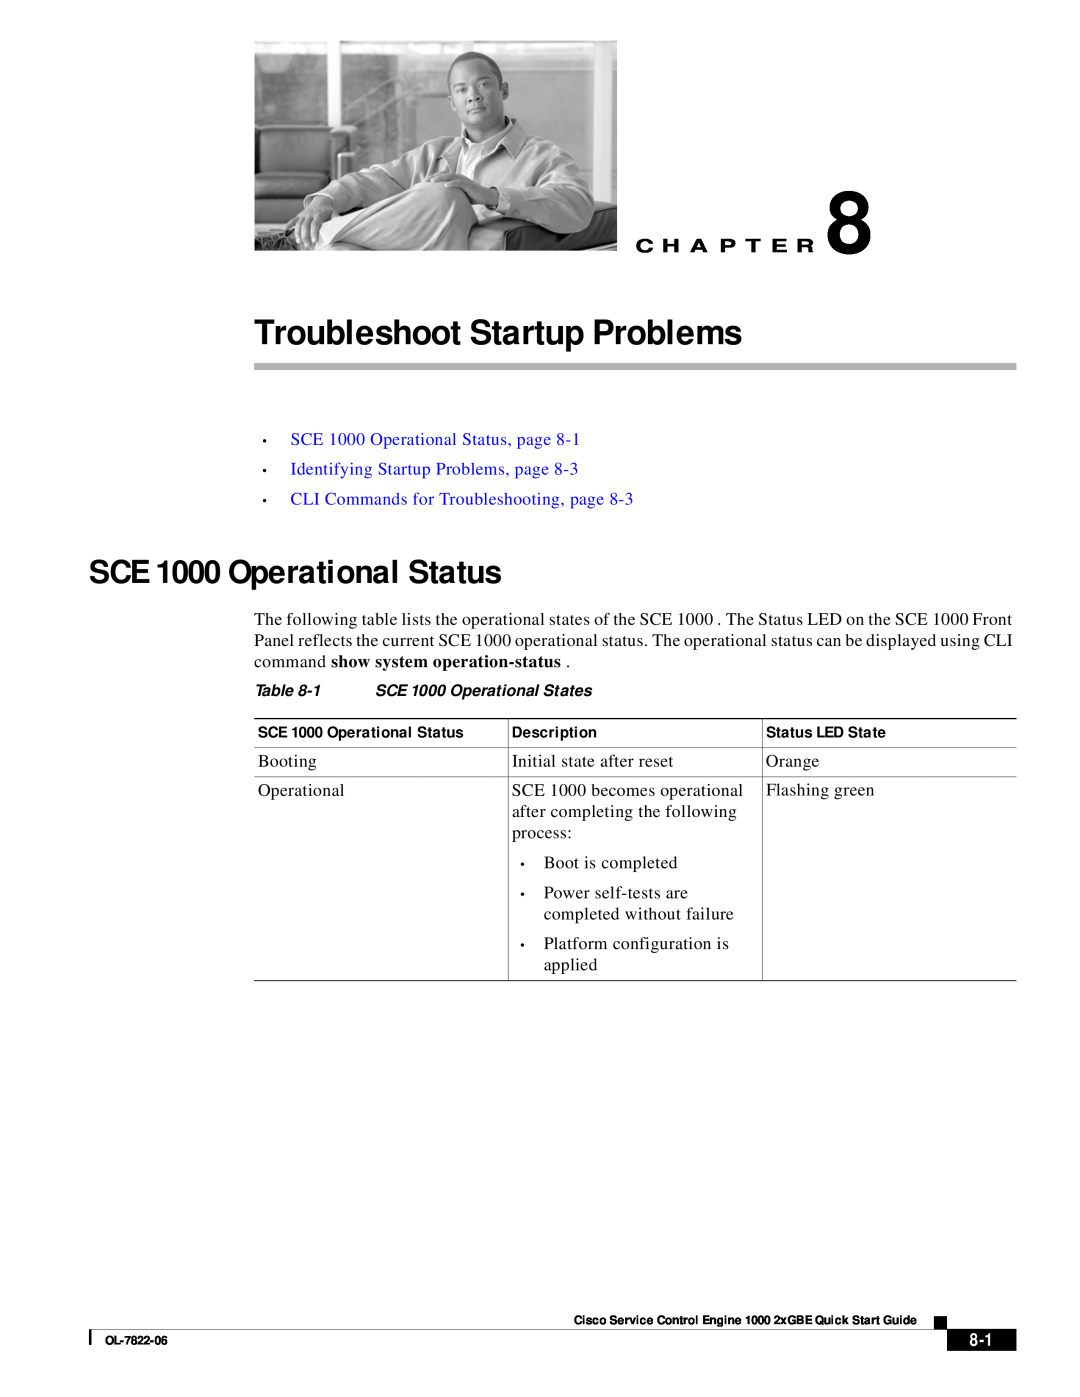 Cisco Systems OL-7822-06 Troubleshoot Startup Problems, SCE 1000 Operational Status, Description, Status LED State 